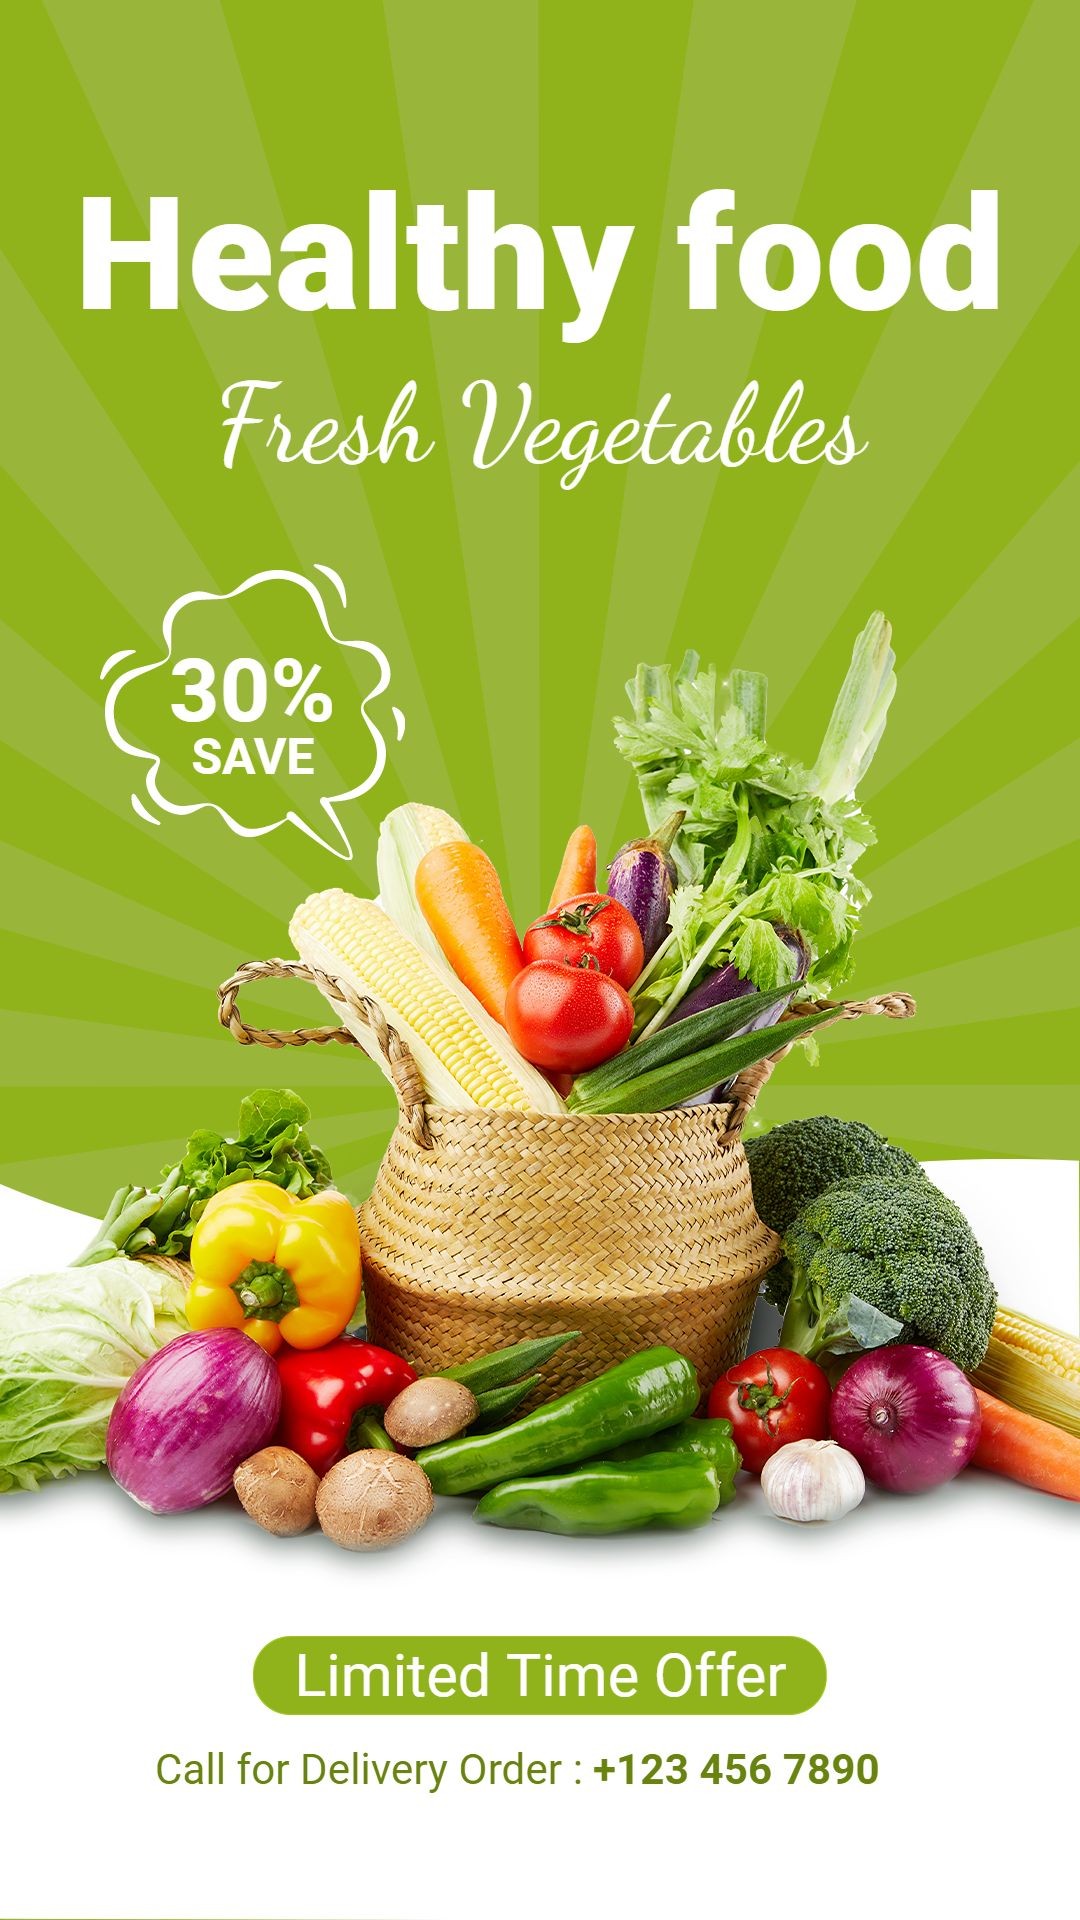 Healthy Groceries Food Fresh Vegetables Supplies Product Promo Sale Ecommerce Story预览效果